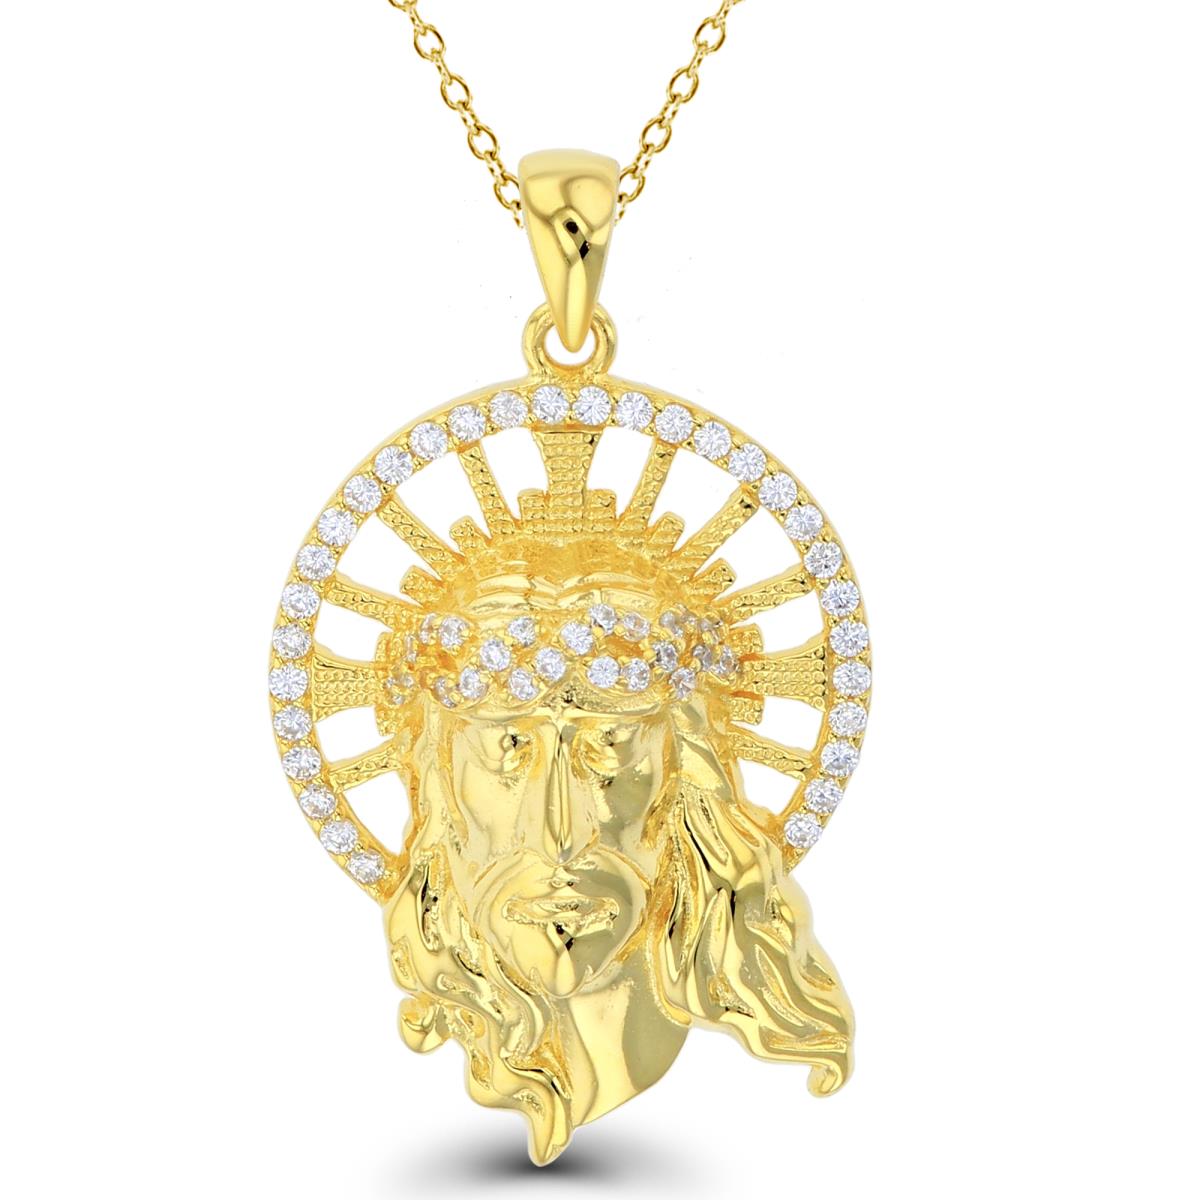 Sterling Silver+1Micron Yellow Gold Rnd White CZ Textured Jesus Head 18"Necklace